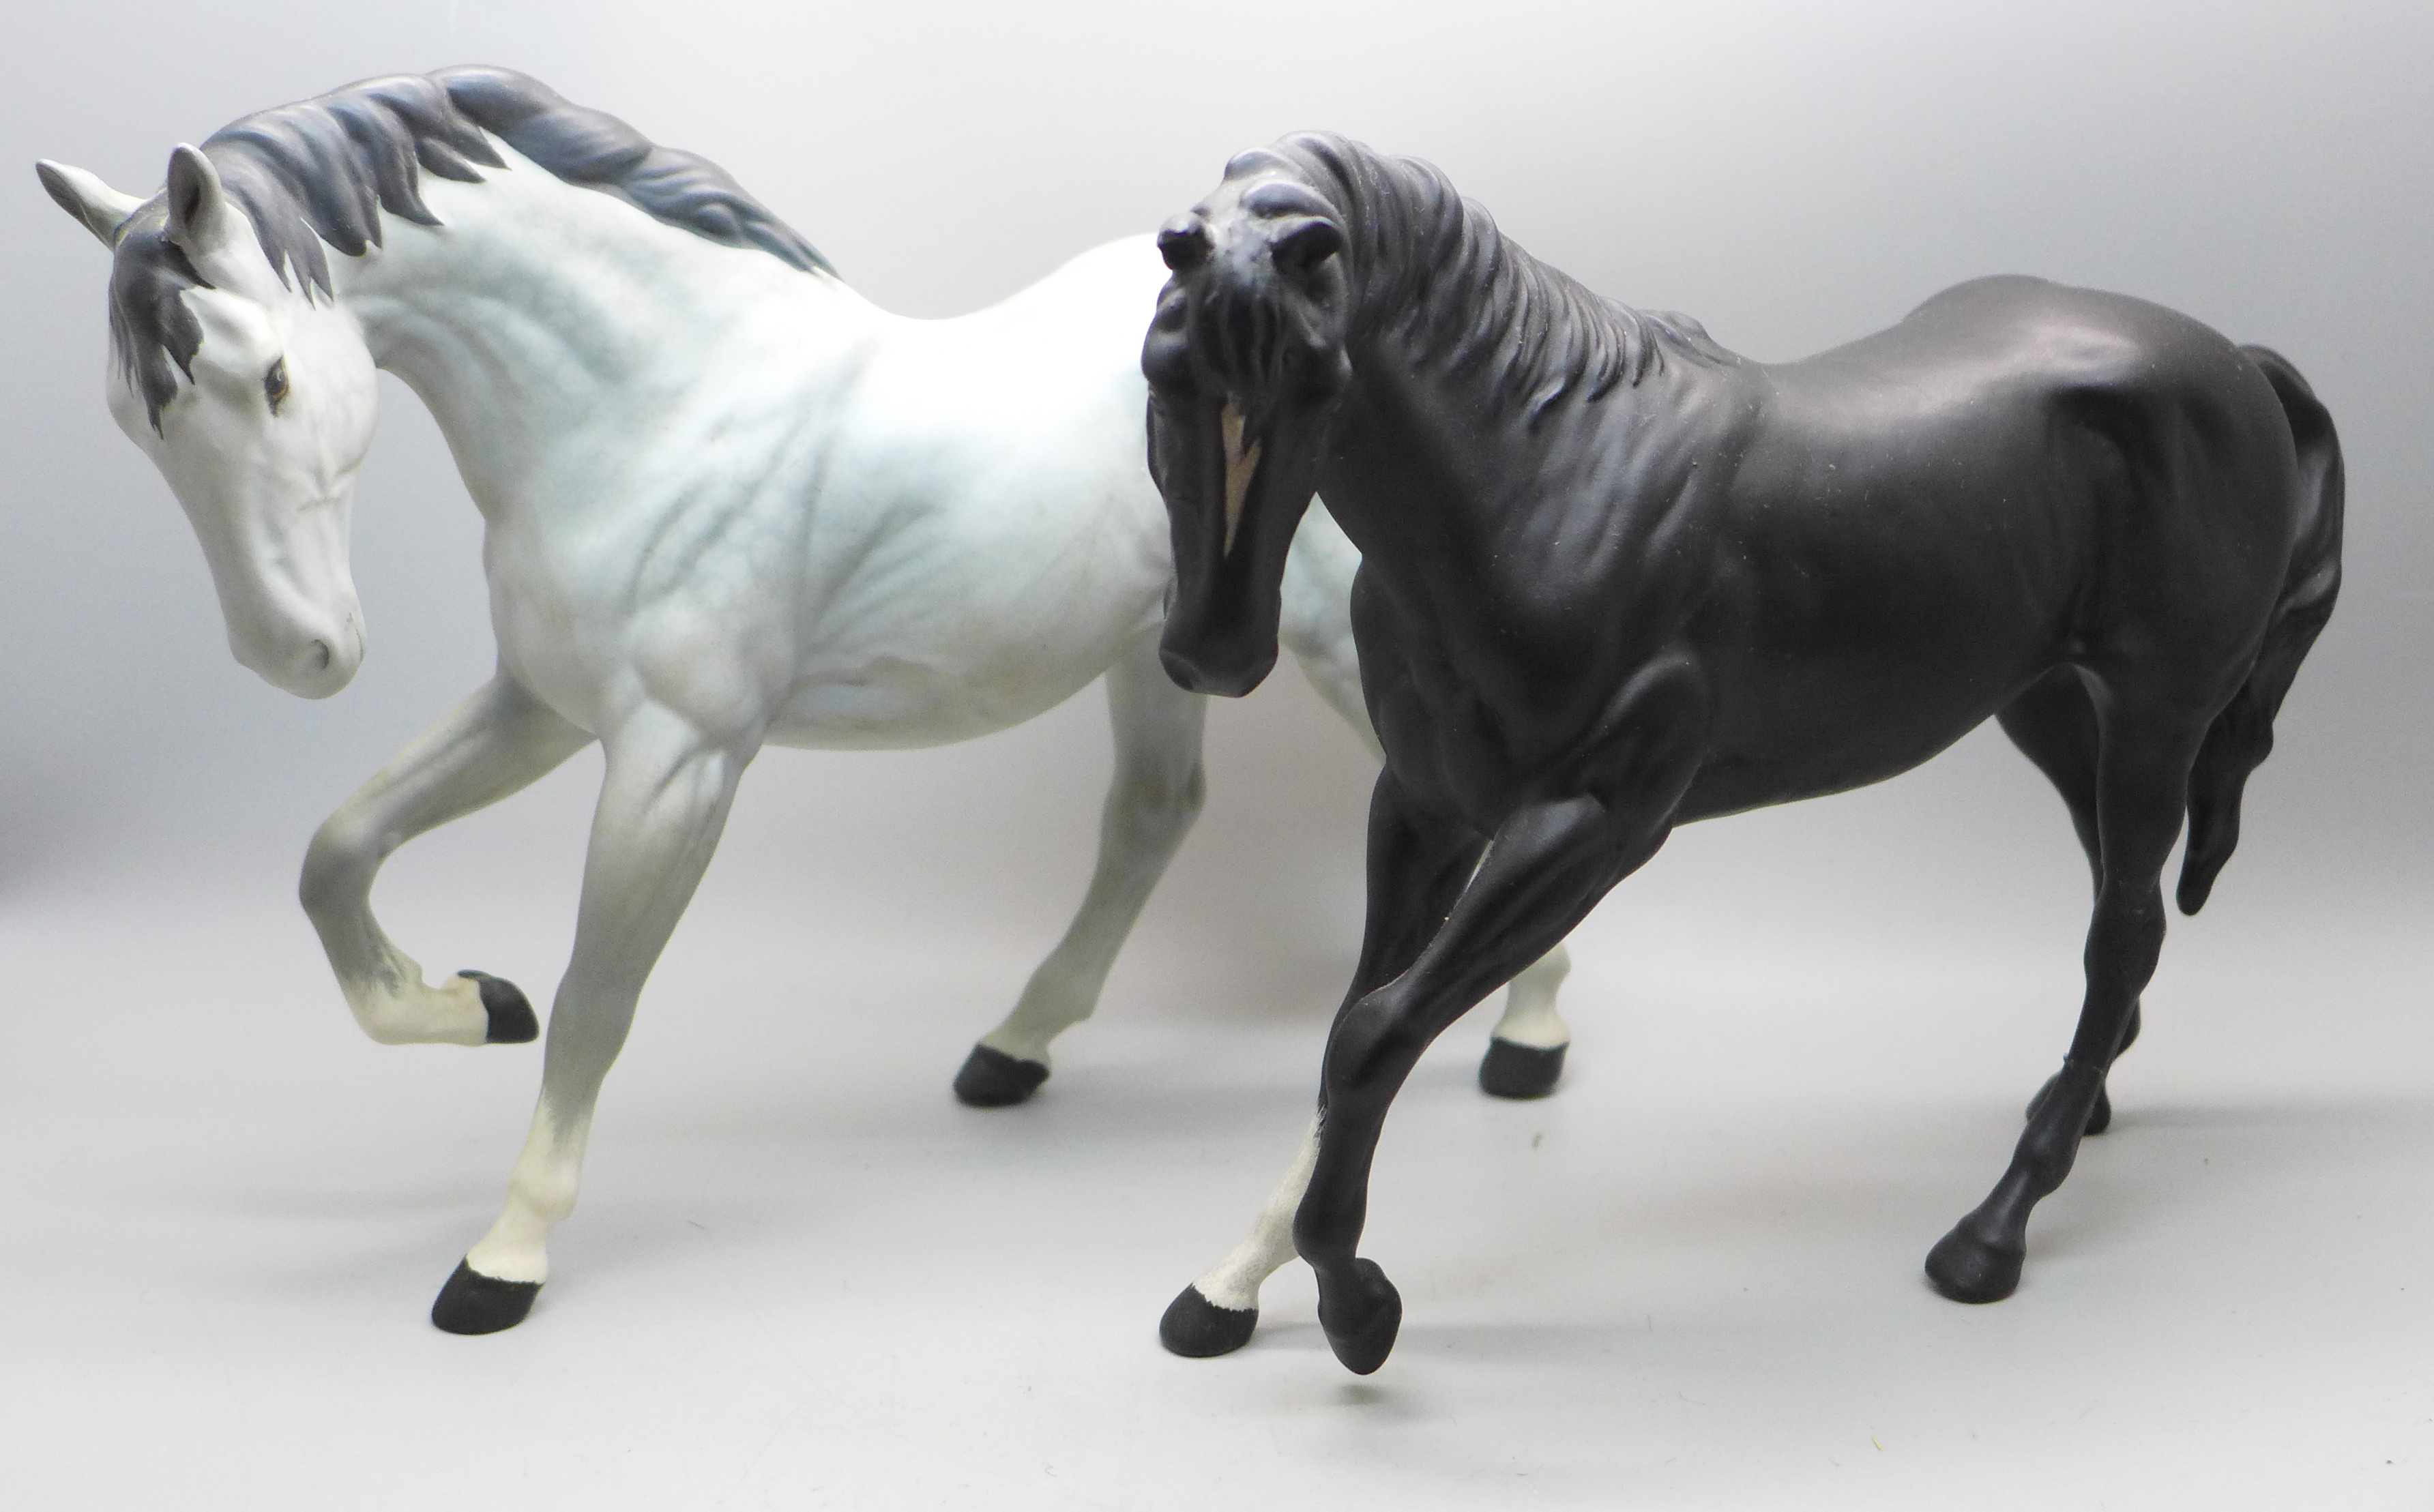 Two Beswick horse figures, hind leg on black horse restored